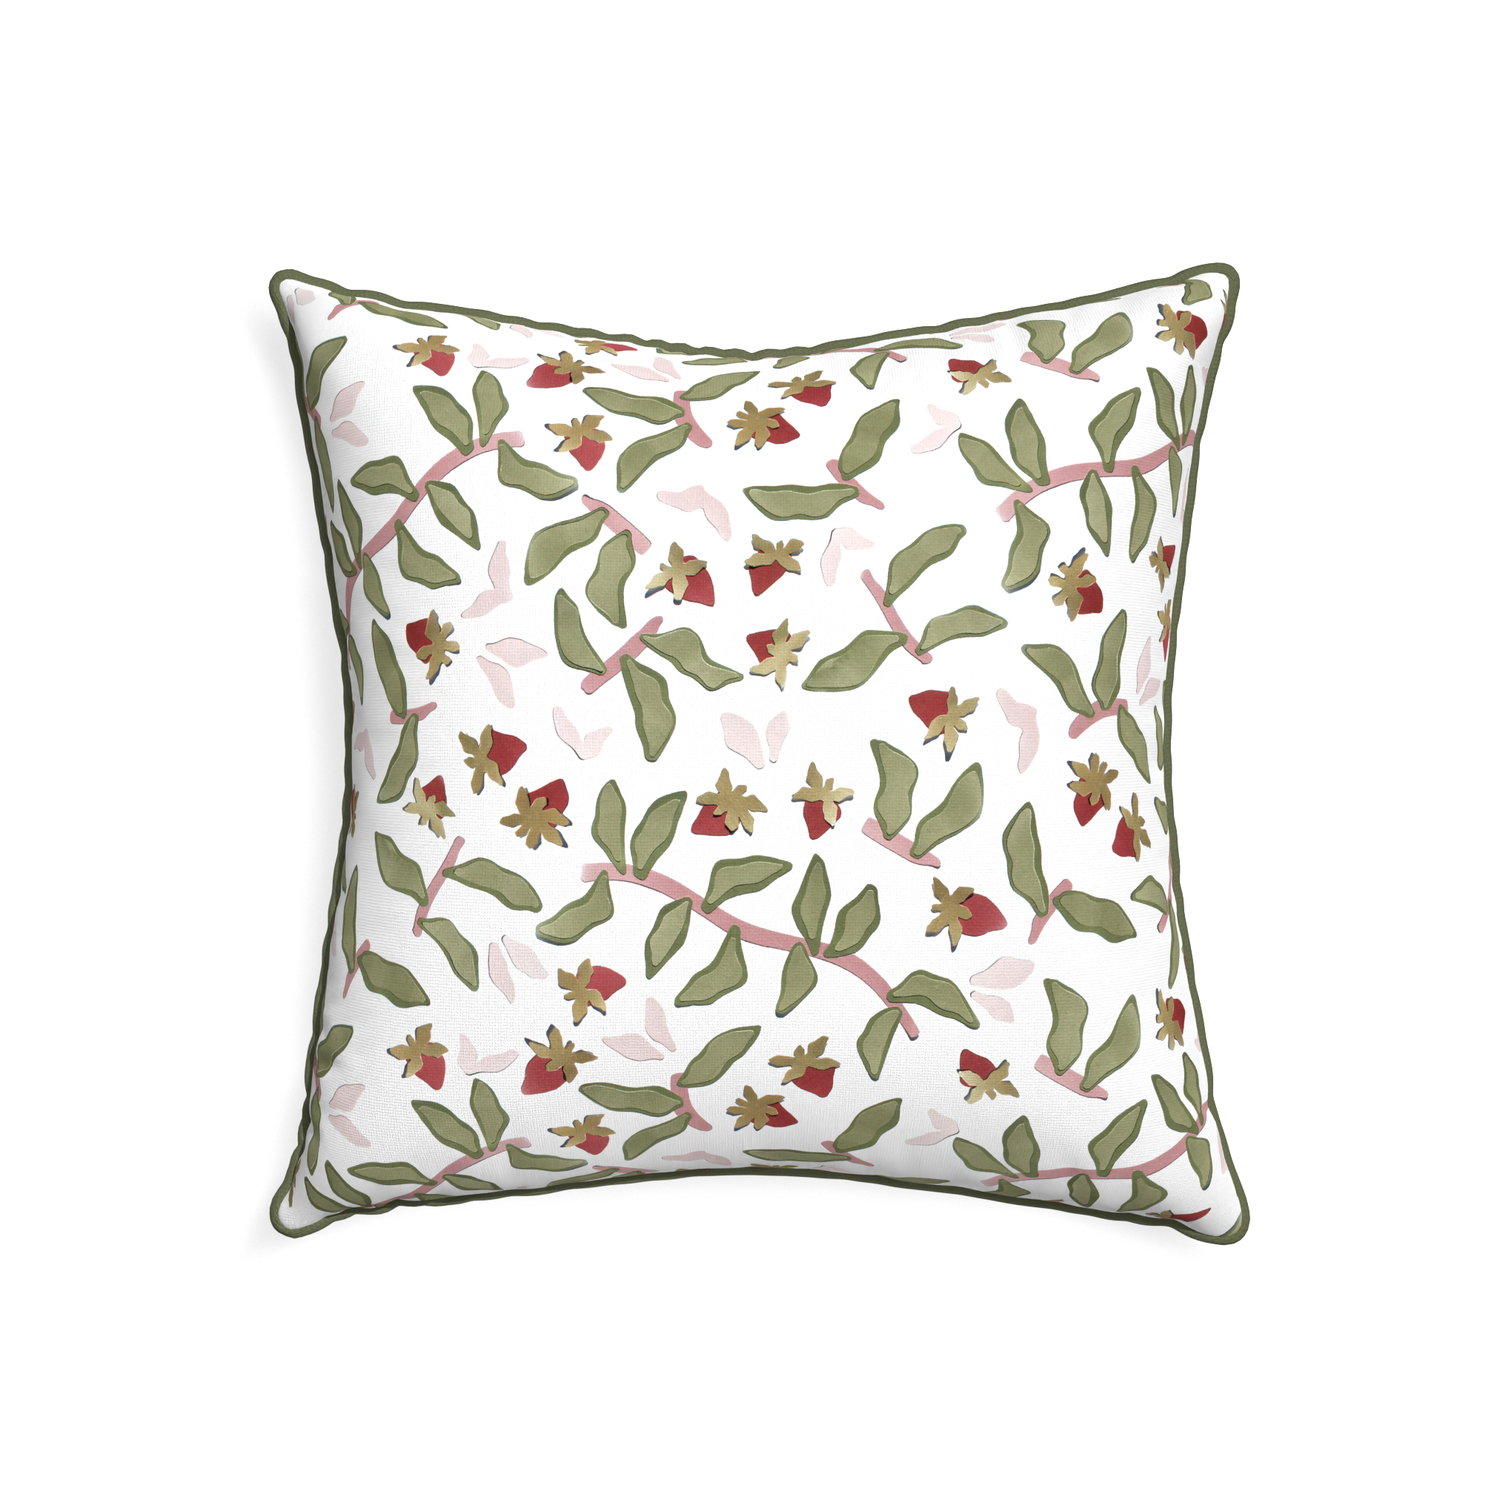 22-square nellie custom pillow with f piping on white background